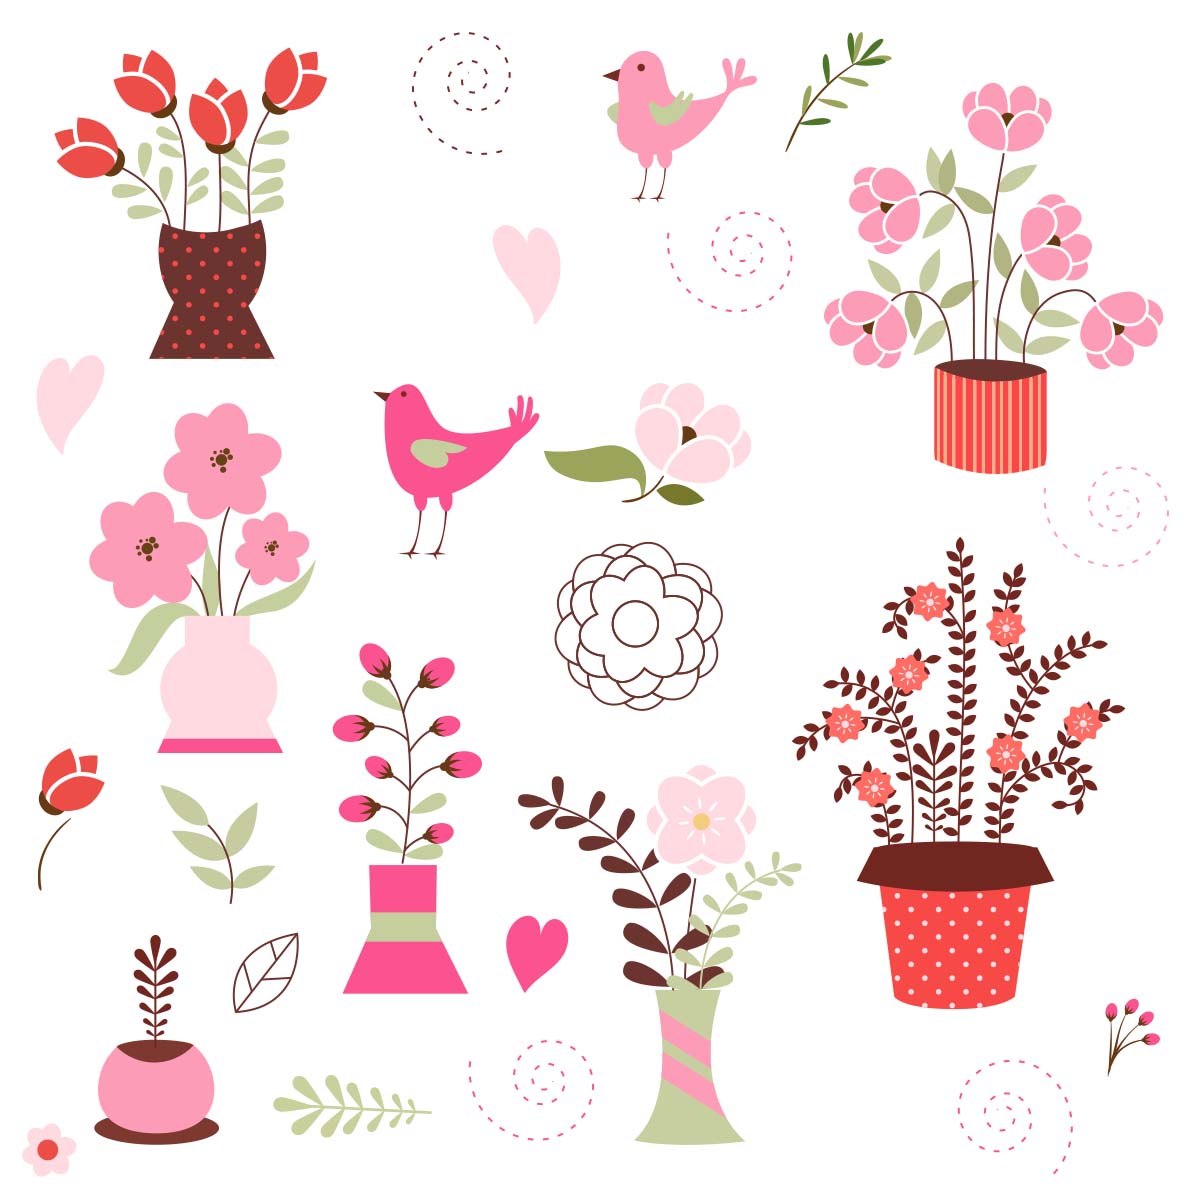 Home flowers with birds free vector set